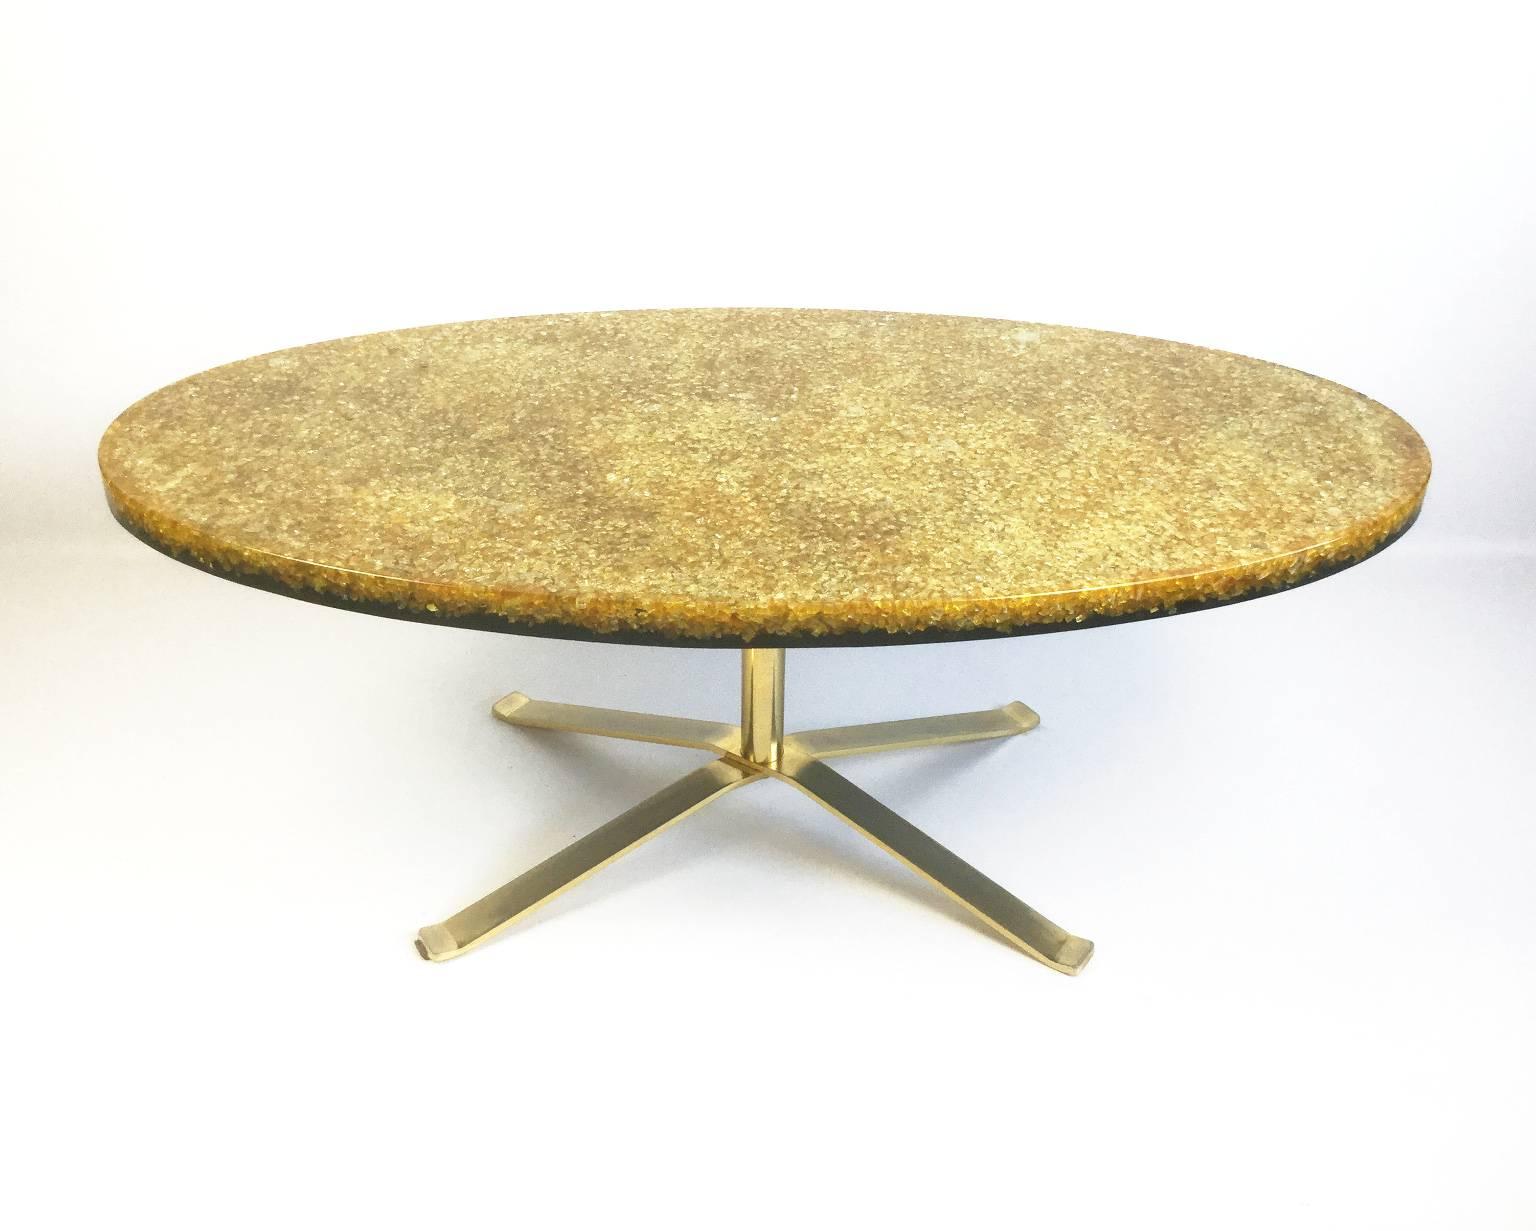 Elliptical coffee table.
Yellow and gold resin fractal top with gilded plated cross legs.
Design in a 1970s by the French platicien Pierre Giraudon (1923-2012).